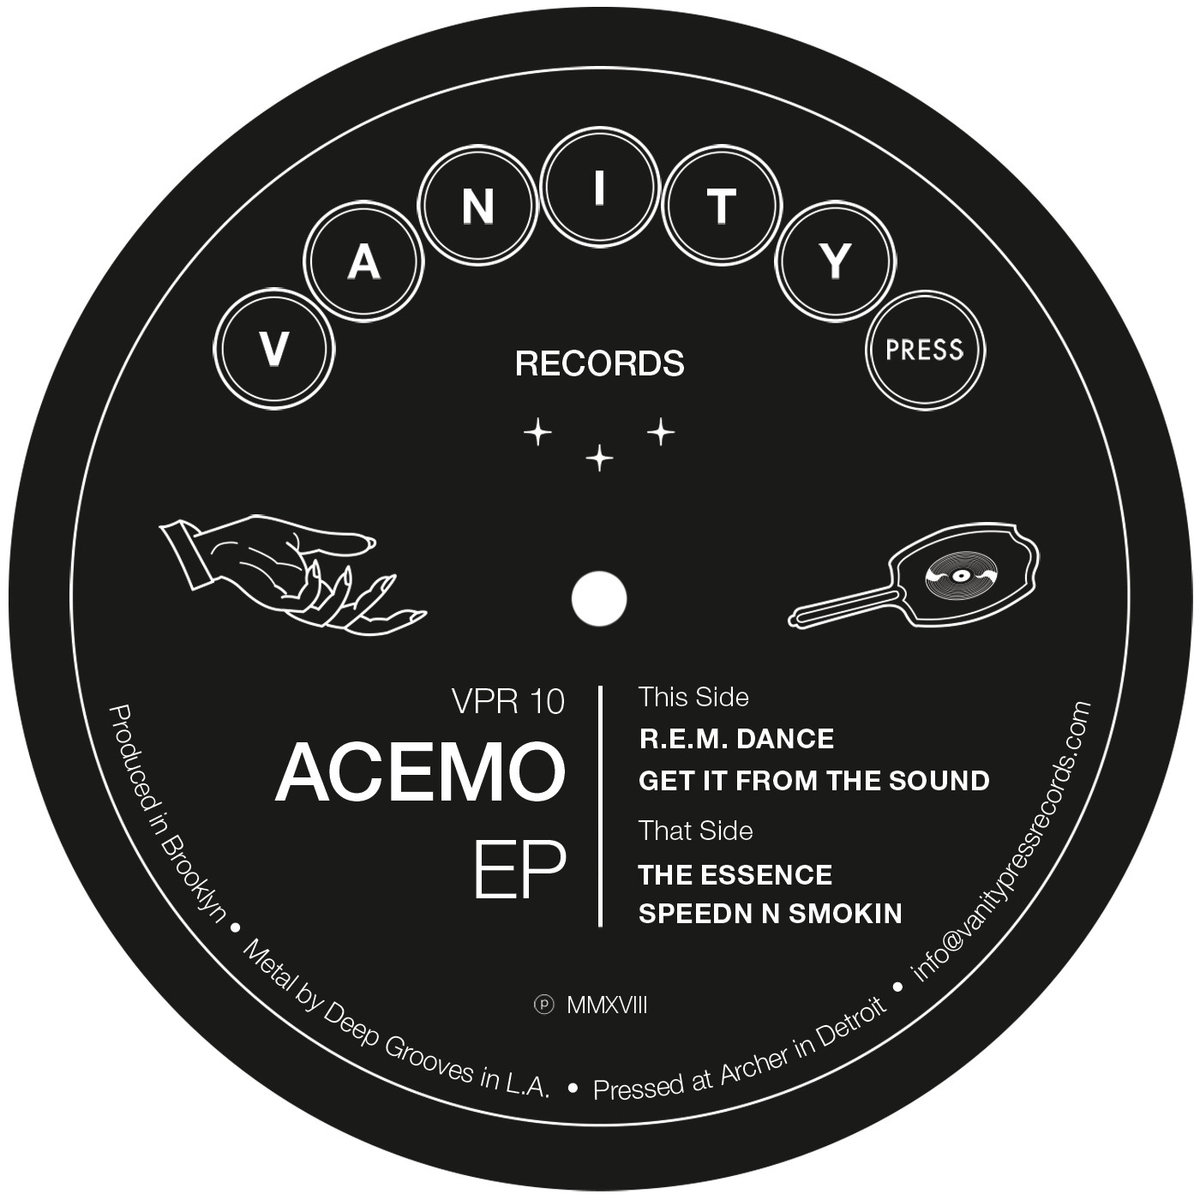 image cover: Ace Mo - AceMo EP / VPR 10